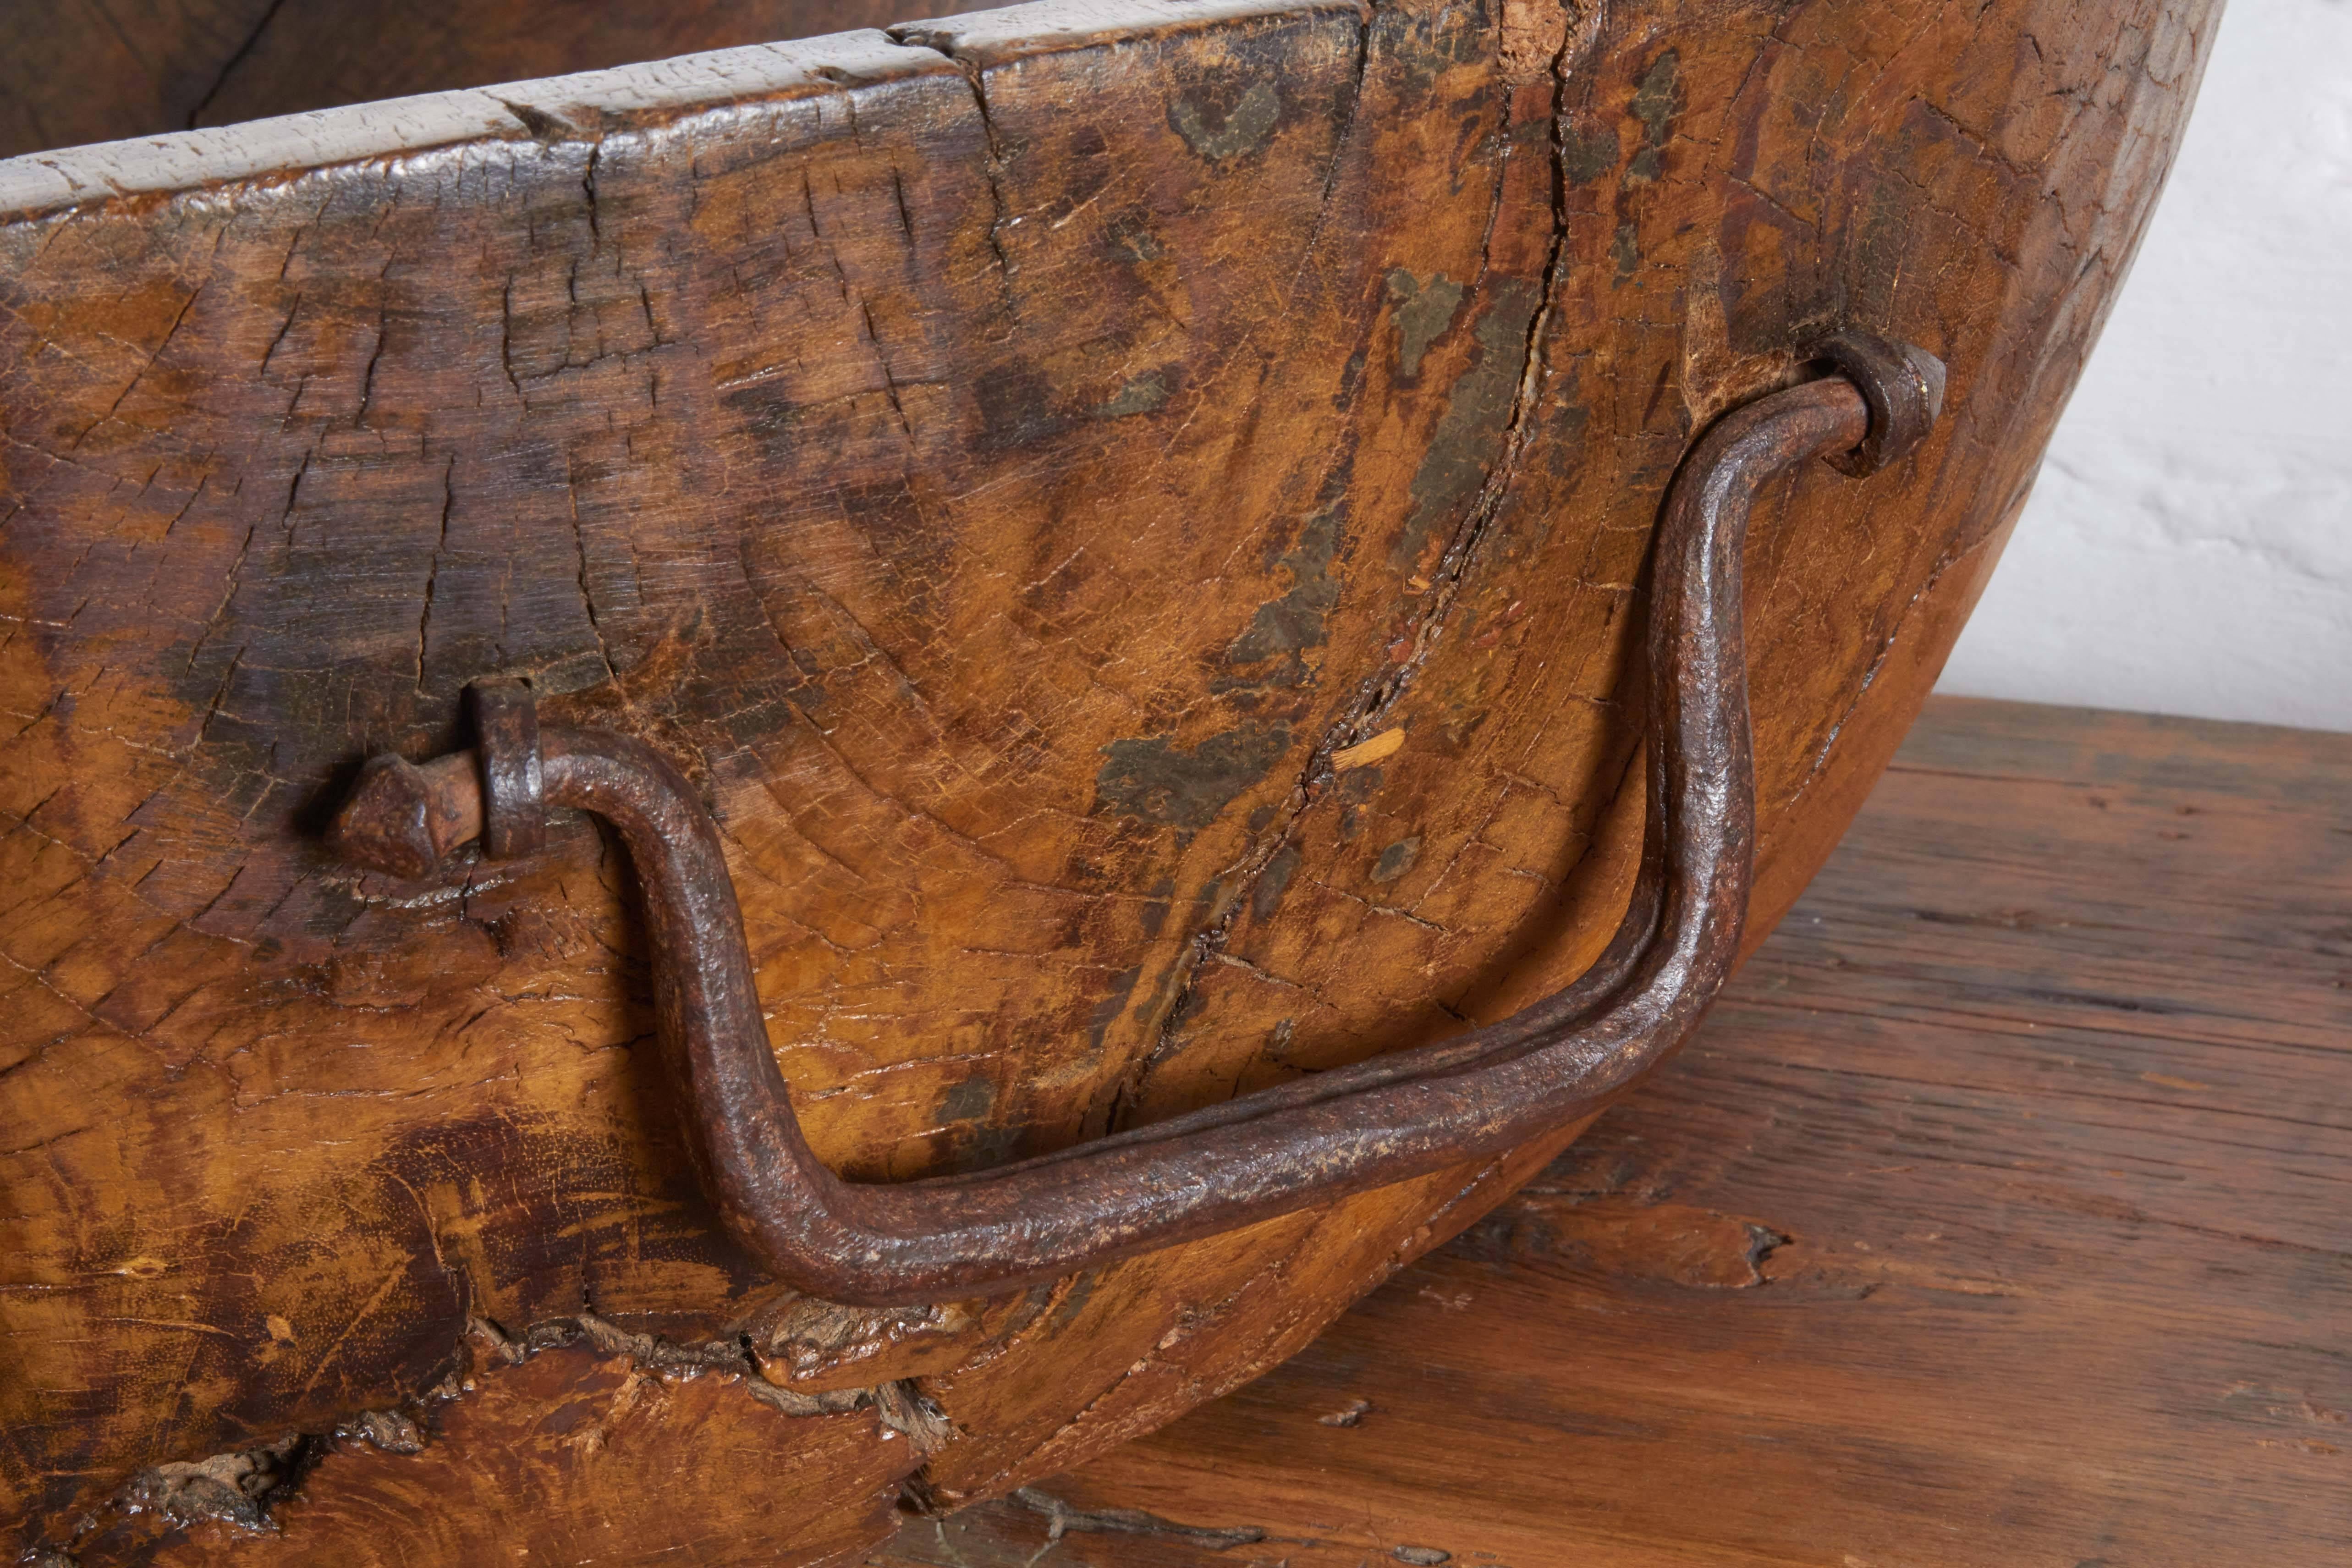 Early 1800s, used in monastery for bread, hand pounded iron handles, carved from solid piece of black walnut.
 